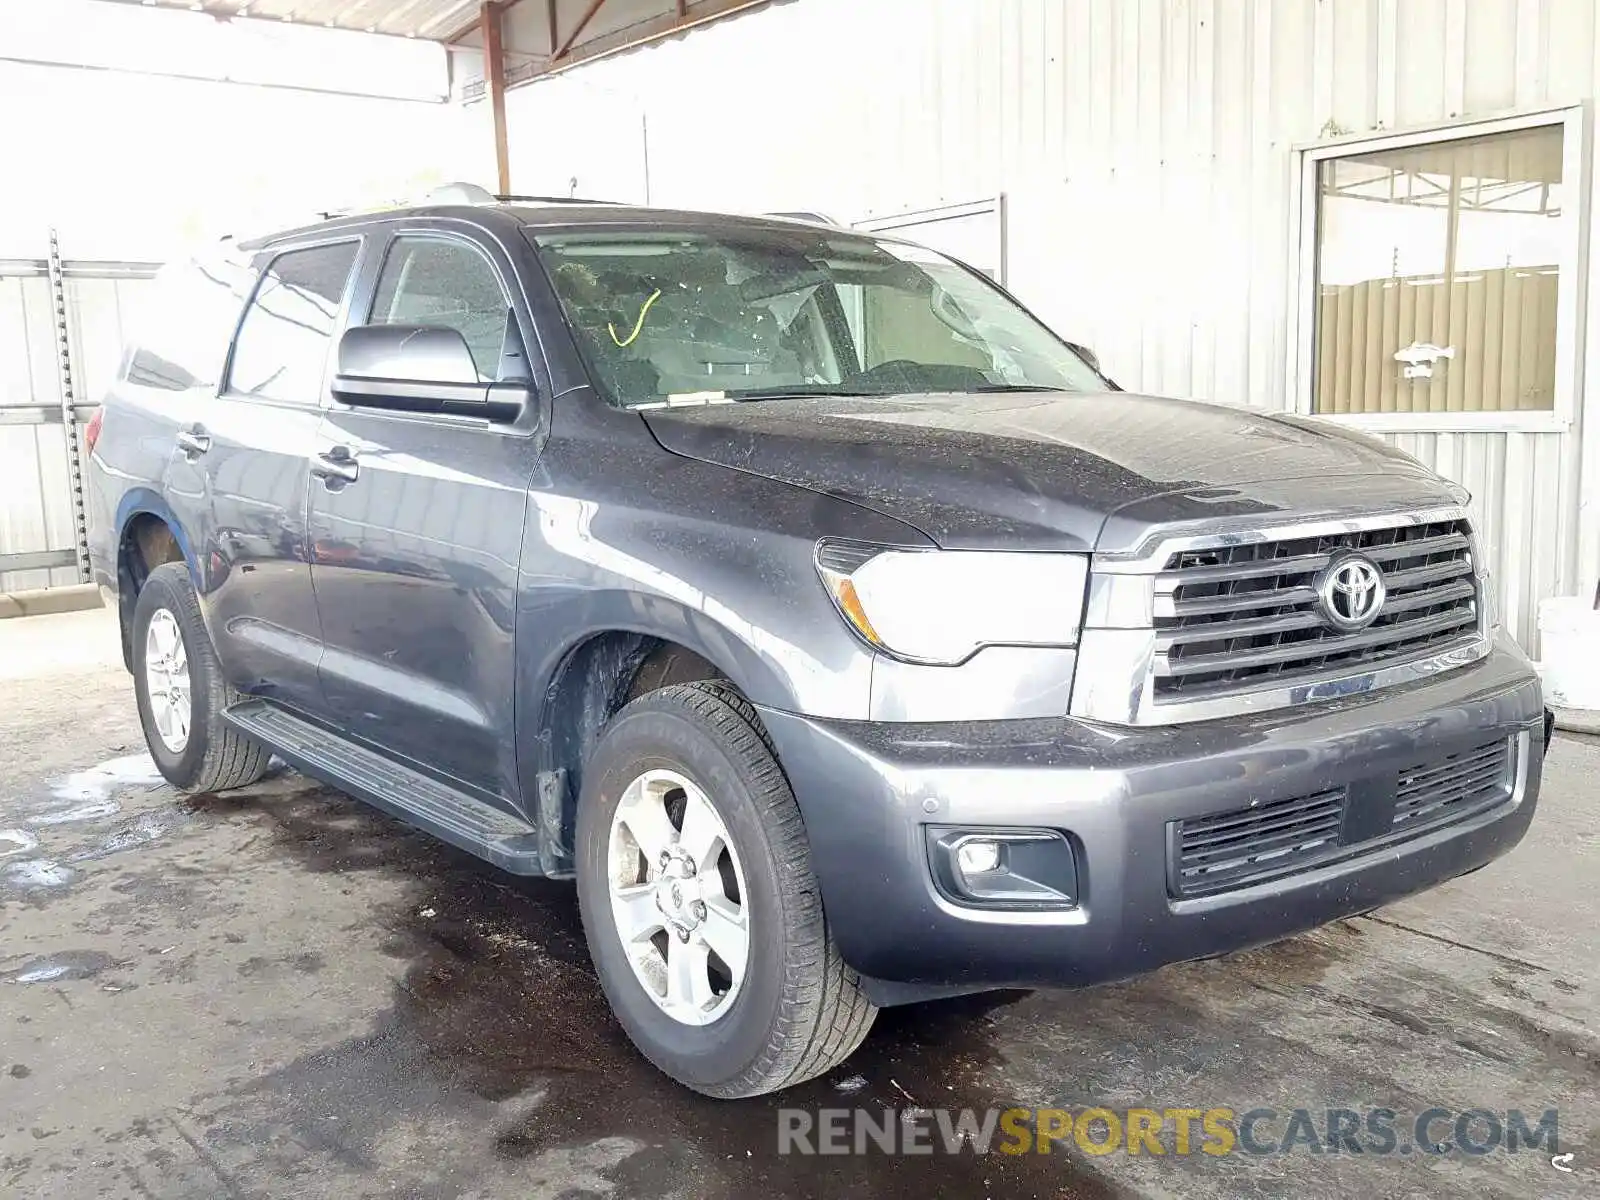 1 Photograph of a damaged car 5TDBY5G13KS170947 TOYOTA SEQUOIA 2019